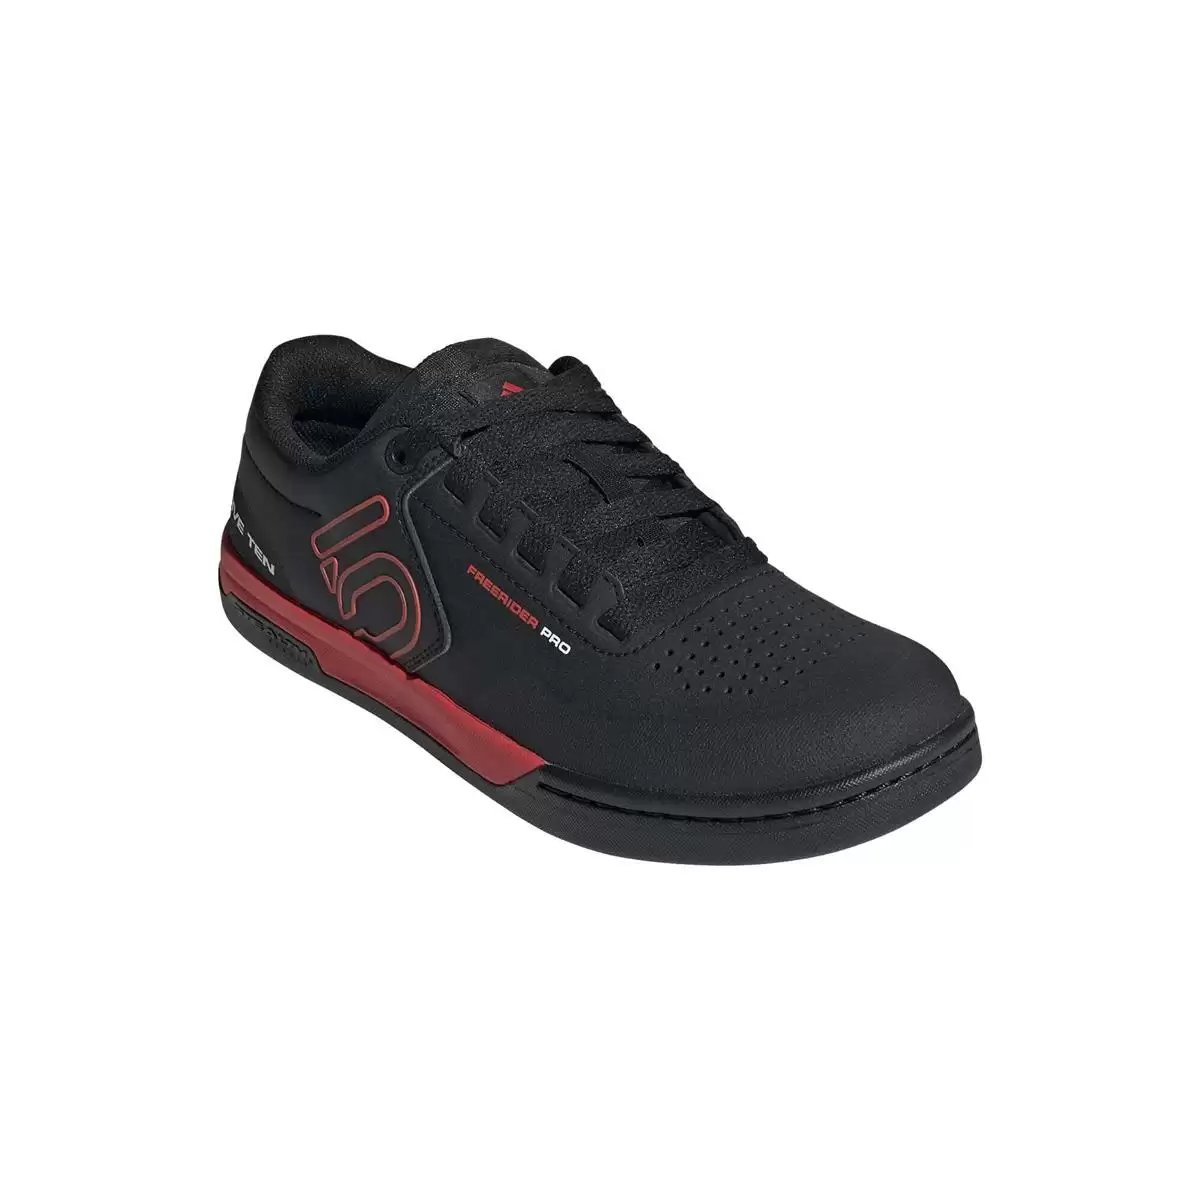 Chaussures Plates VTT Freerider Pro Noir/Rouge Taille 41 #1